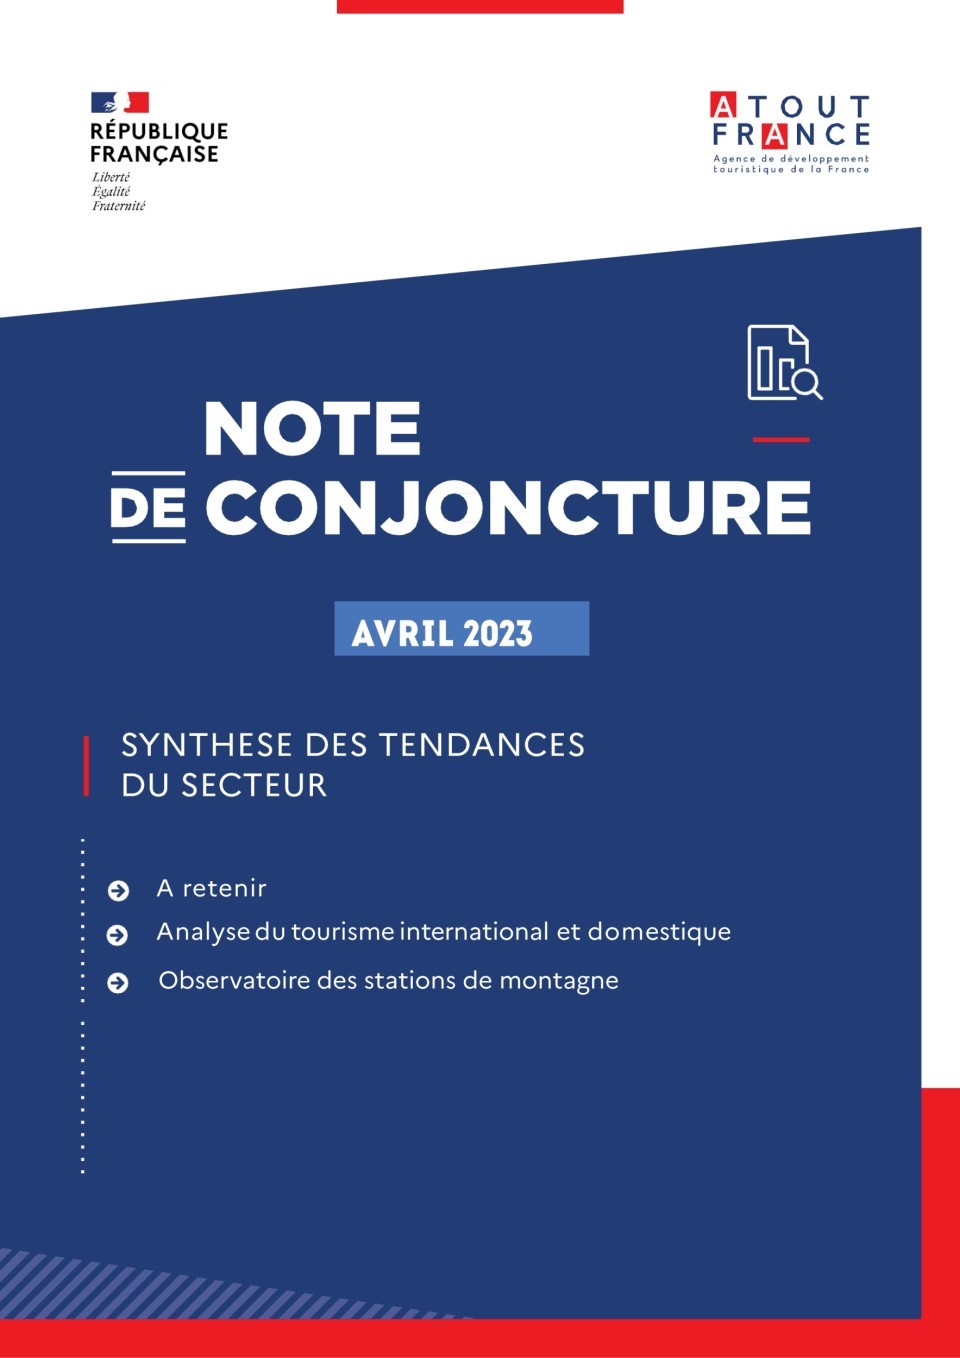 note_conjoncture_avril_2023_synthese_1_1.jpg